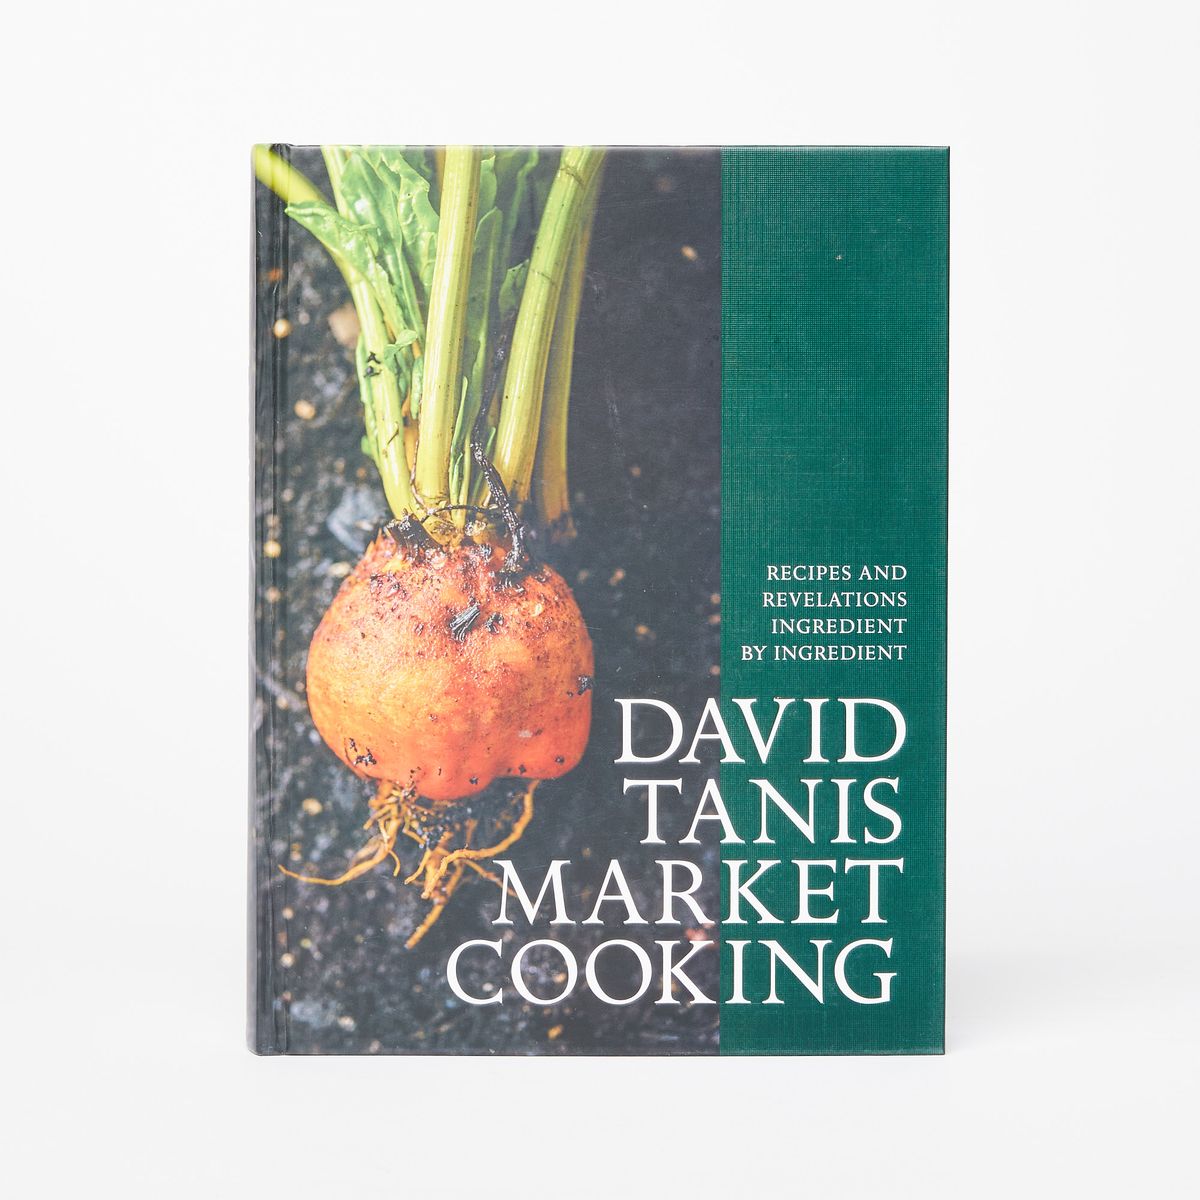 The cover of a cookbook with a picture of an orange beet with a green border on the right with the text "David Tanis Market Cooking"